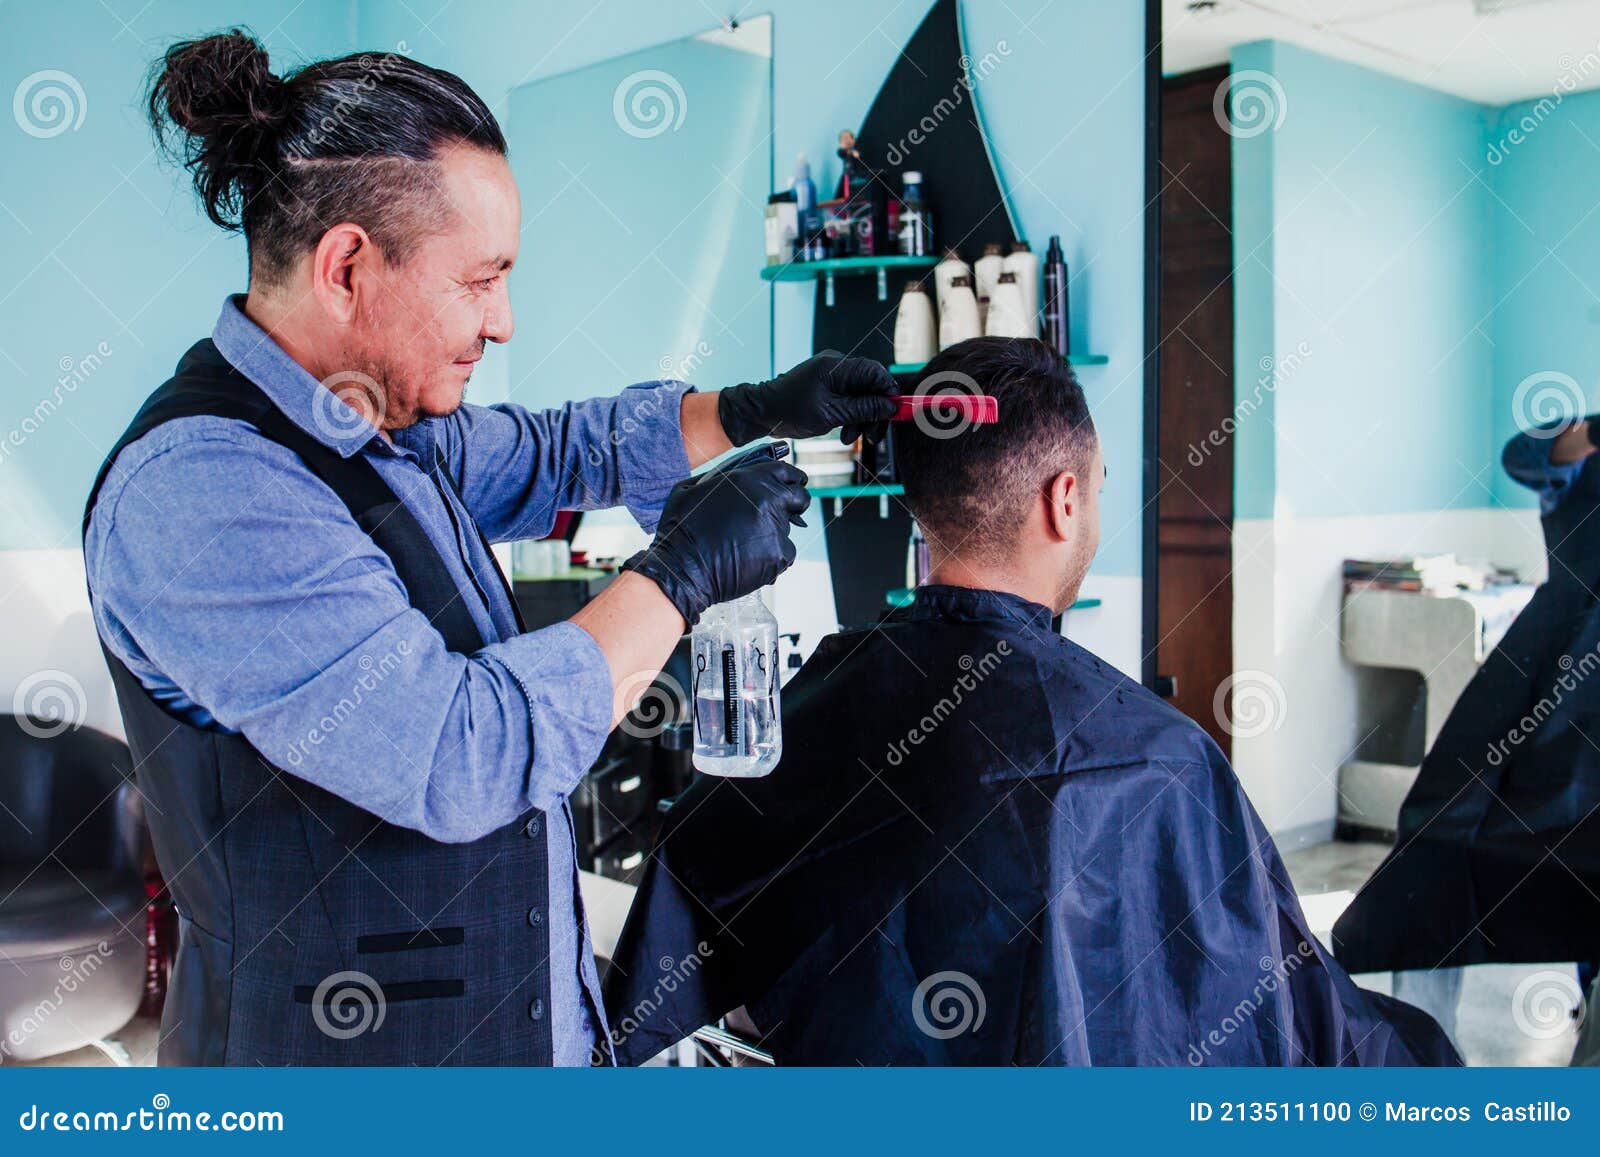 latin man stylist cutting hair to a client in a barber shop in mexico